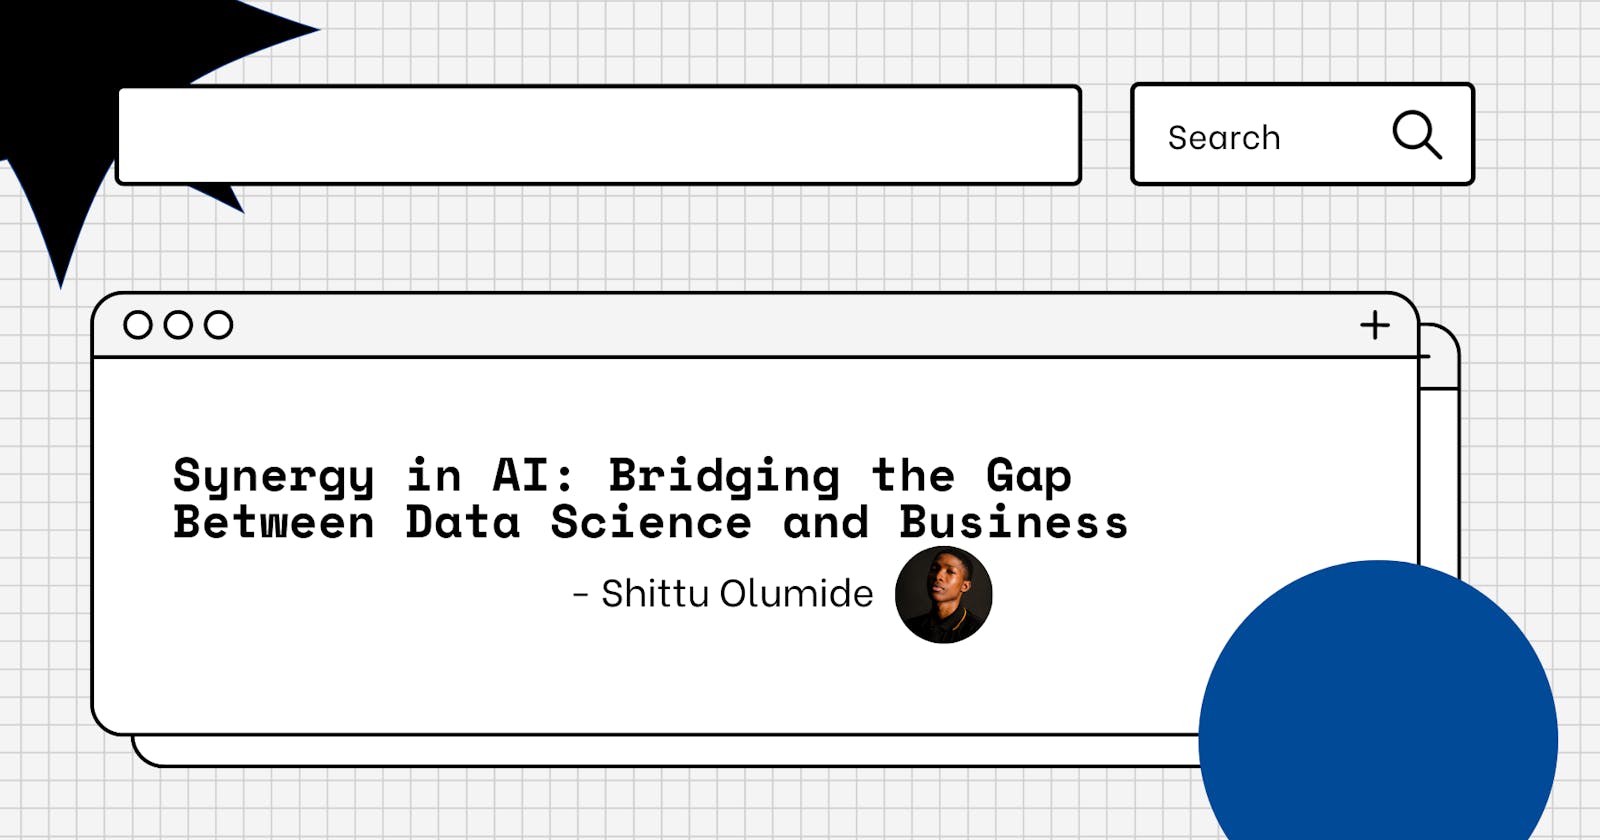 Synergy in AI: Bridging the Gap Between Data Science and Business